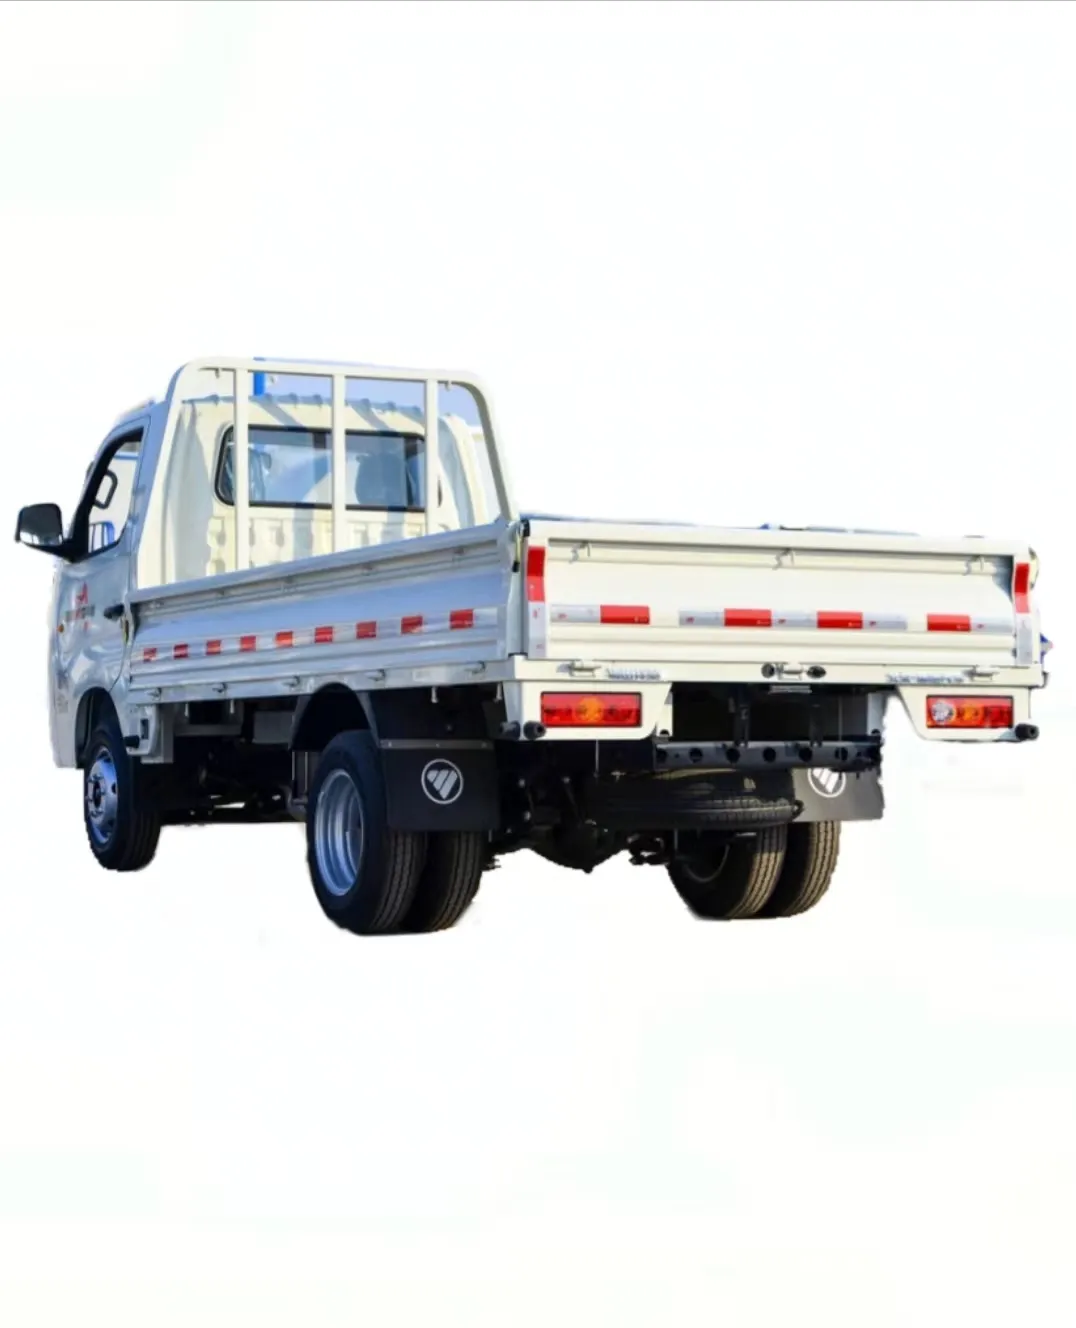 Foton Euro 5 diesel small 1-2 ton light cargo truck can be customized and in stock